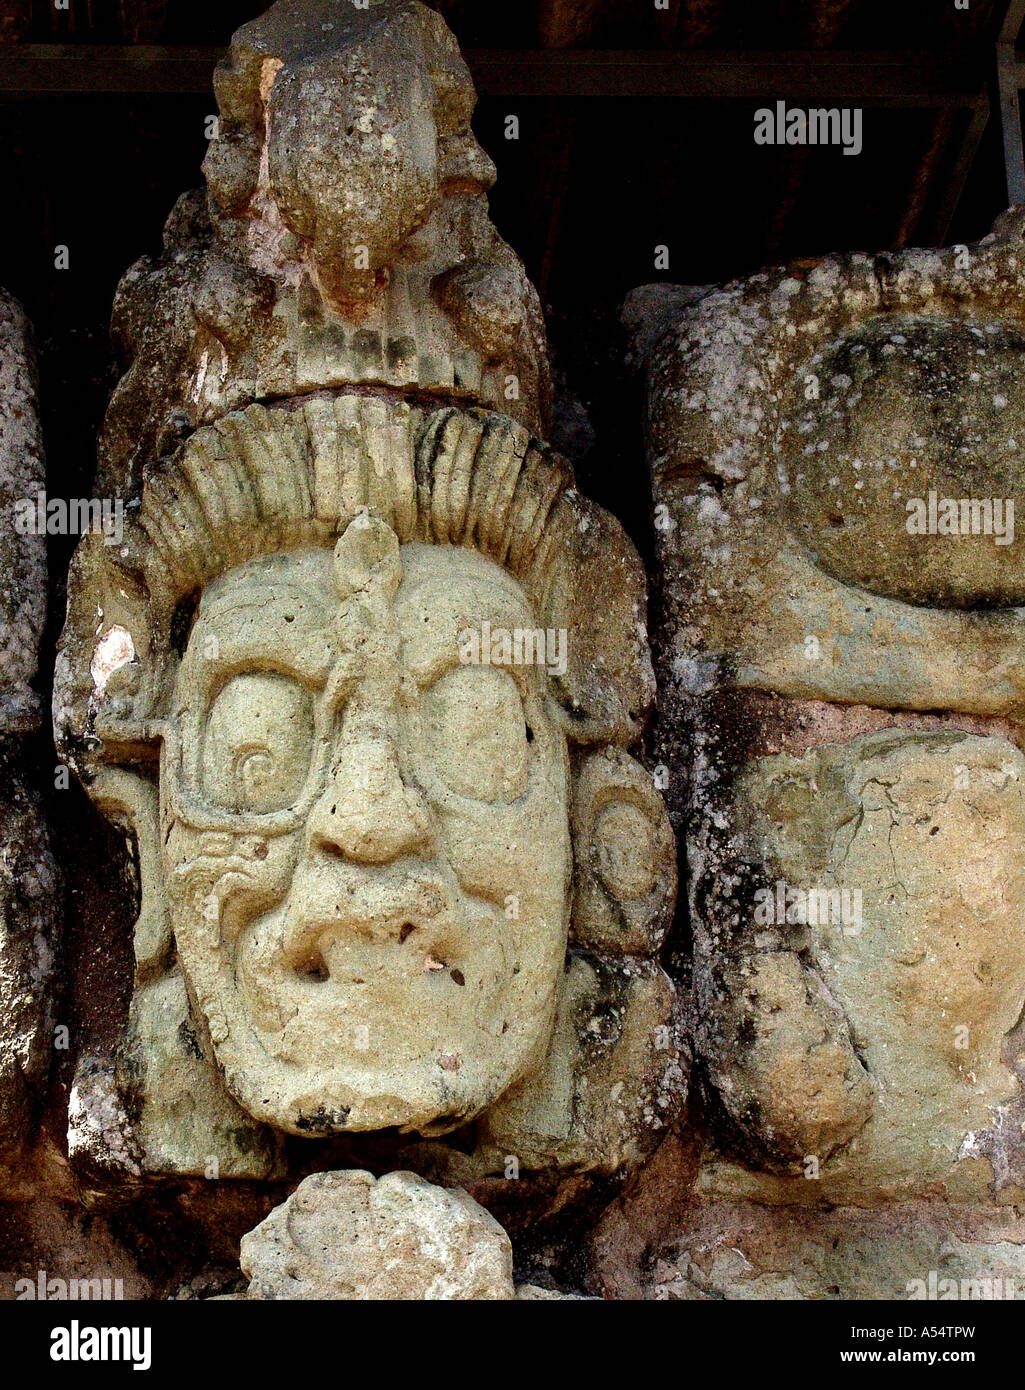 Painet ip1972 honduras stone head copan mayan ruins country developing nation less economically developed culture emerging Stock Photo